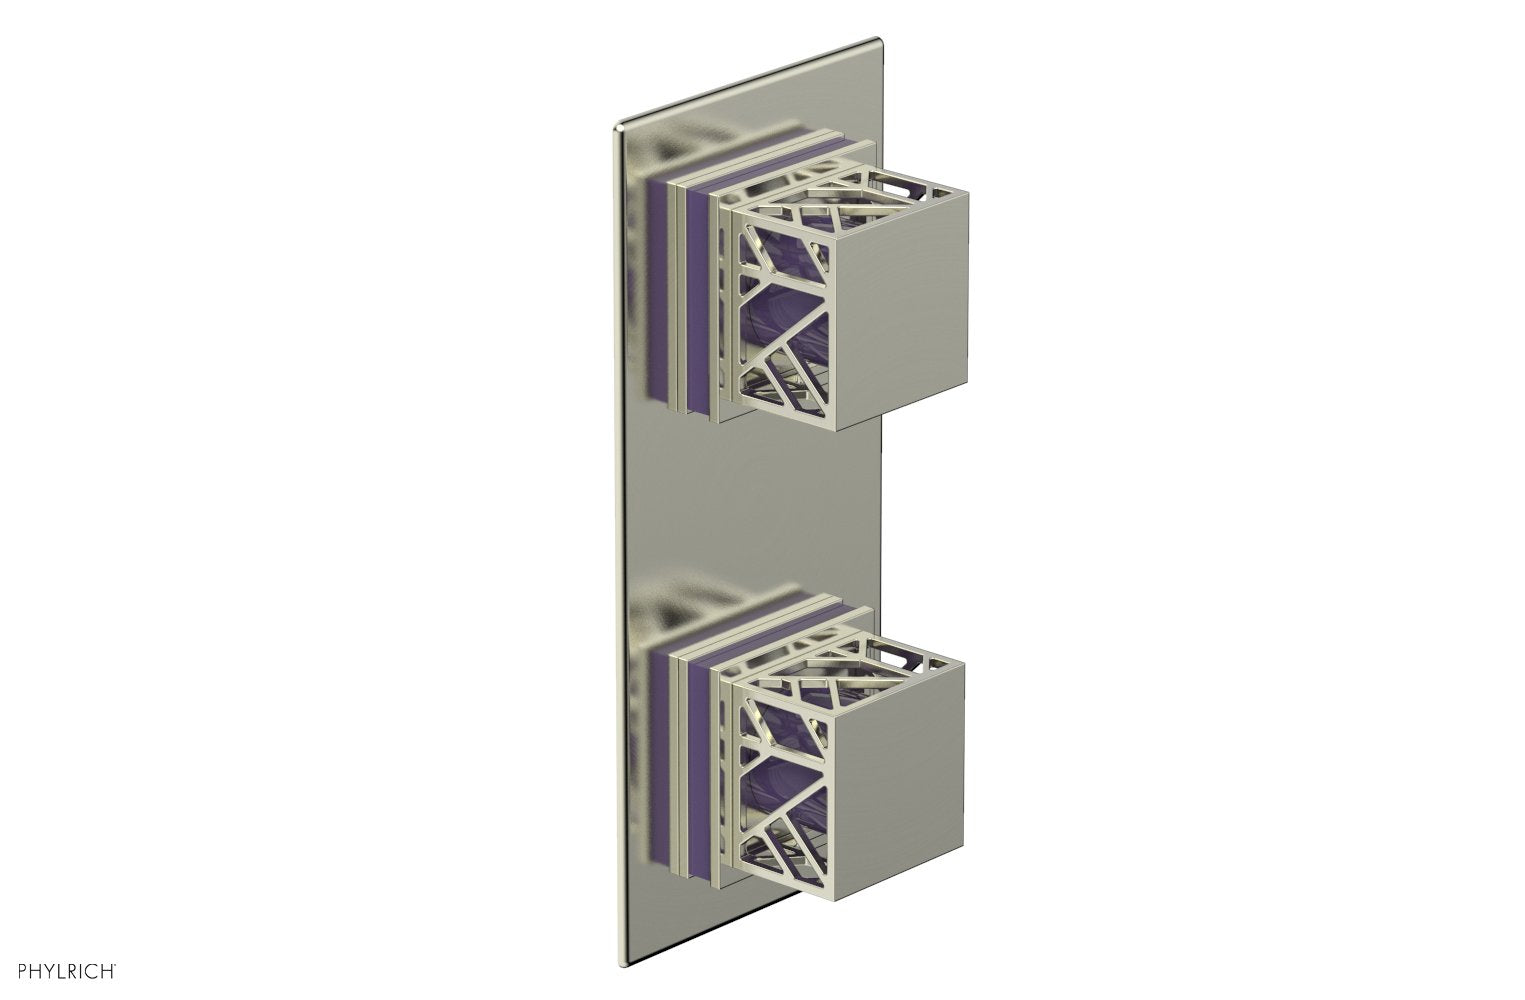 Phylrich JOLIE Thermostatic Valve with Volume Control or Diverter with "Purple" Accents